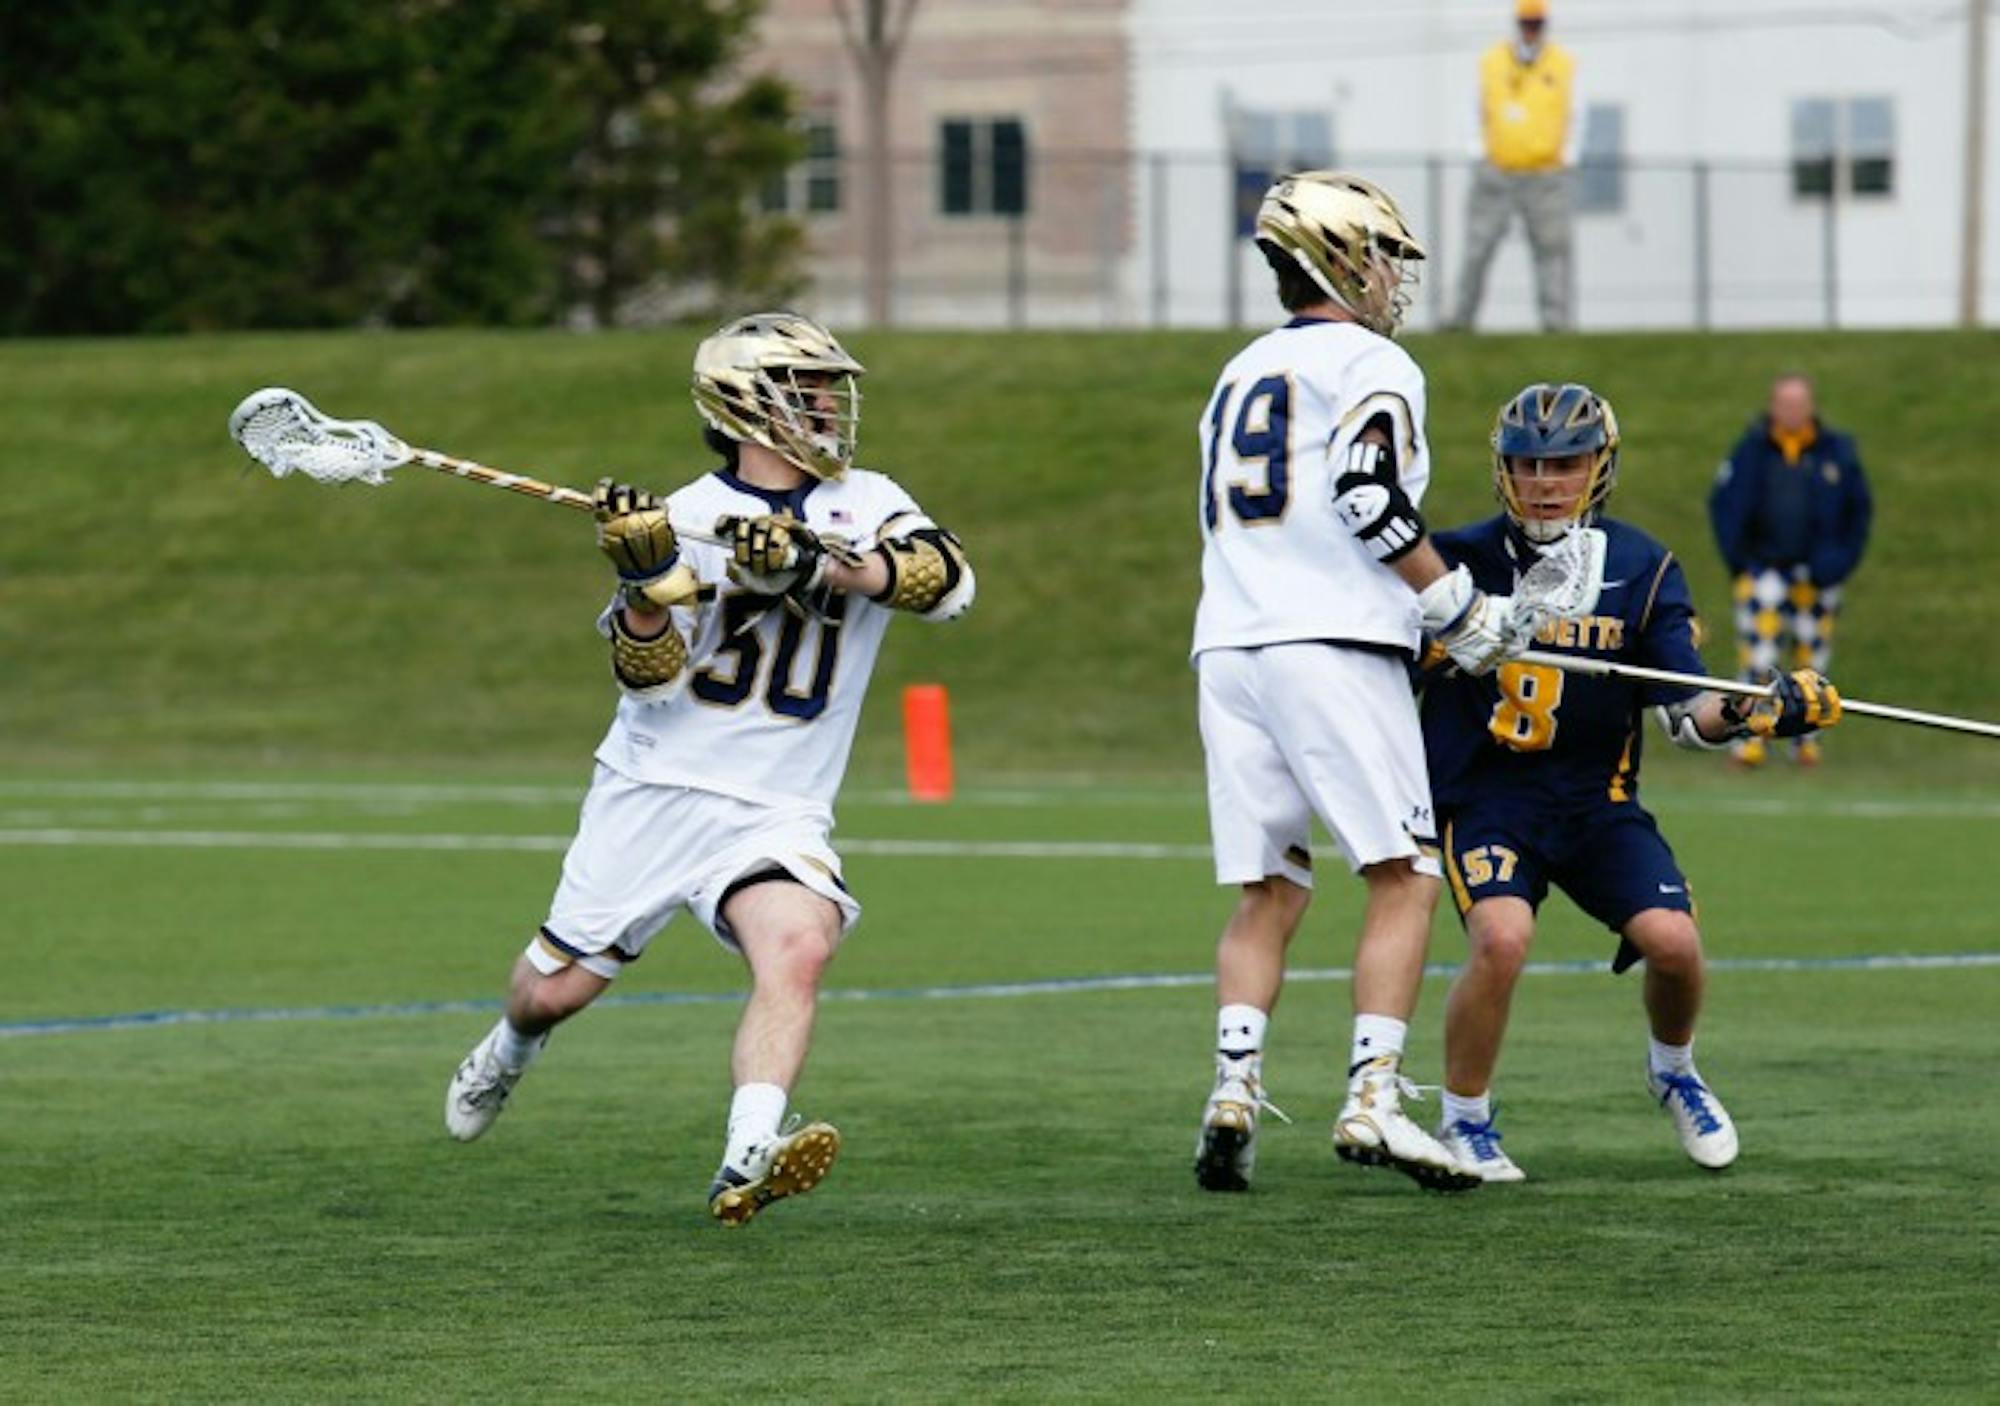 Irish senior attack Matt Kavanagh passes the ball during Notre Dame’s 8-7 overtime win over Marquette at Arlotta Stadium on Wednesday. Kavanagh scored five points and shot the winning goal of the game.